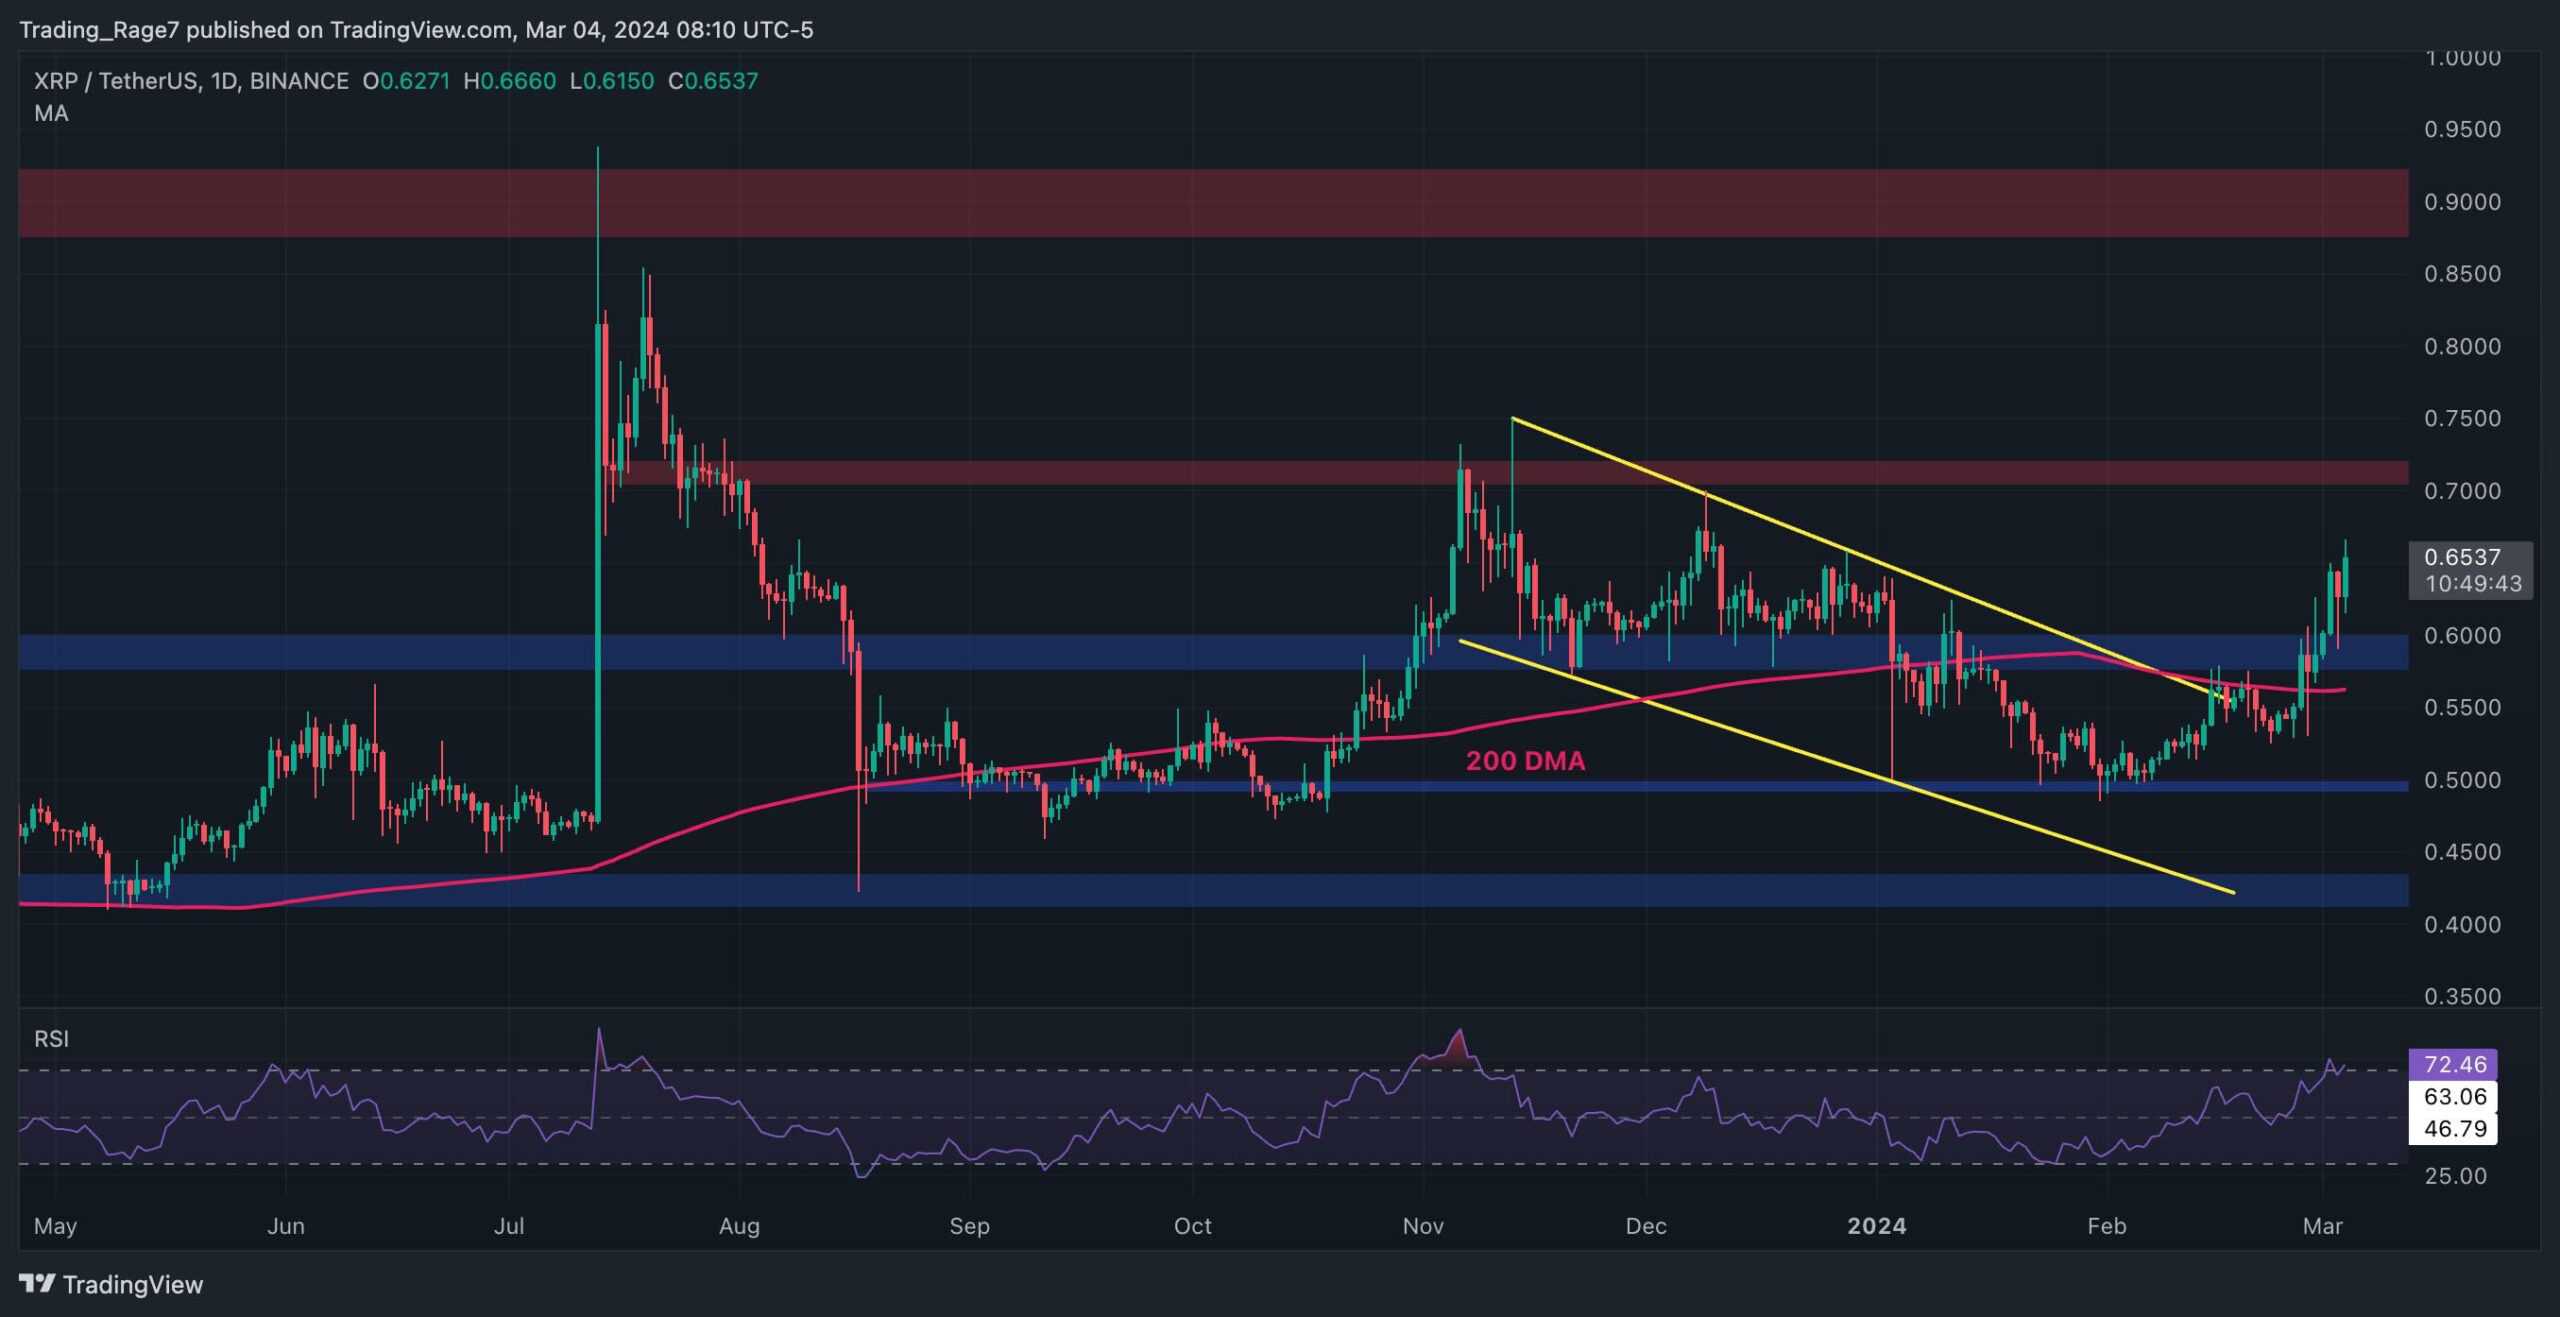 Traders Anticipate an XRP Bull Run Following the Surge to $0.65 (Ripple Price Analysis)